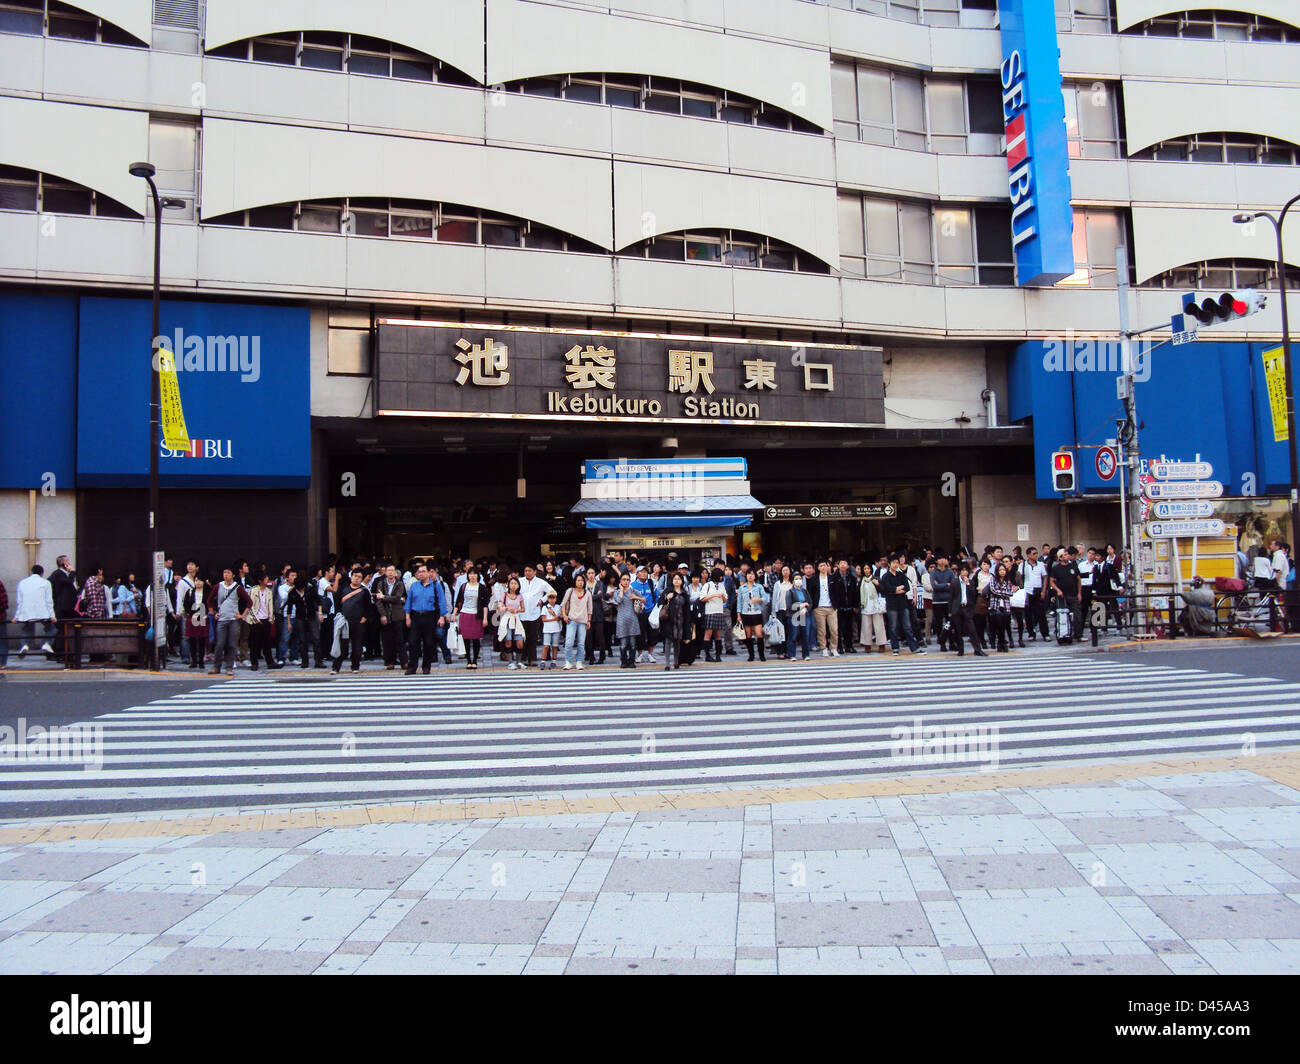 Japanese people waiting to cross the street in front of Ikebukuro station, Tokyo Stock Photo